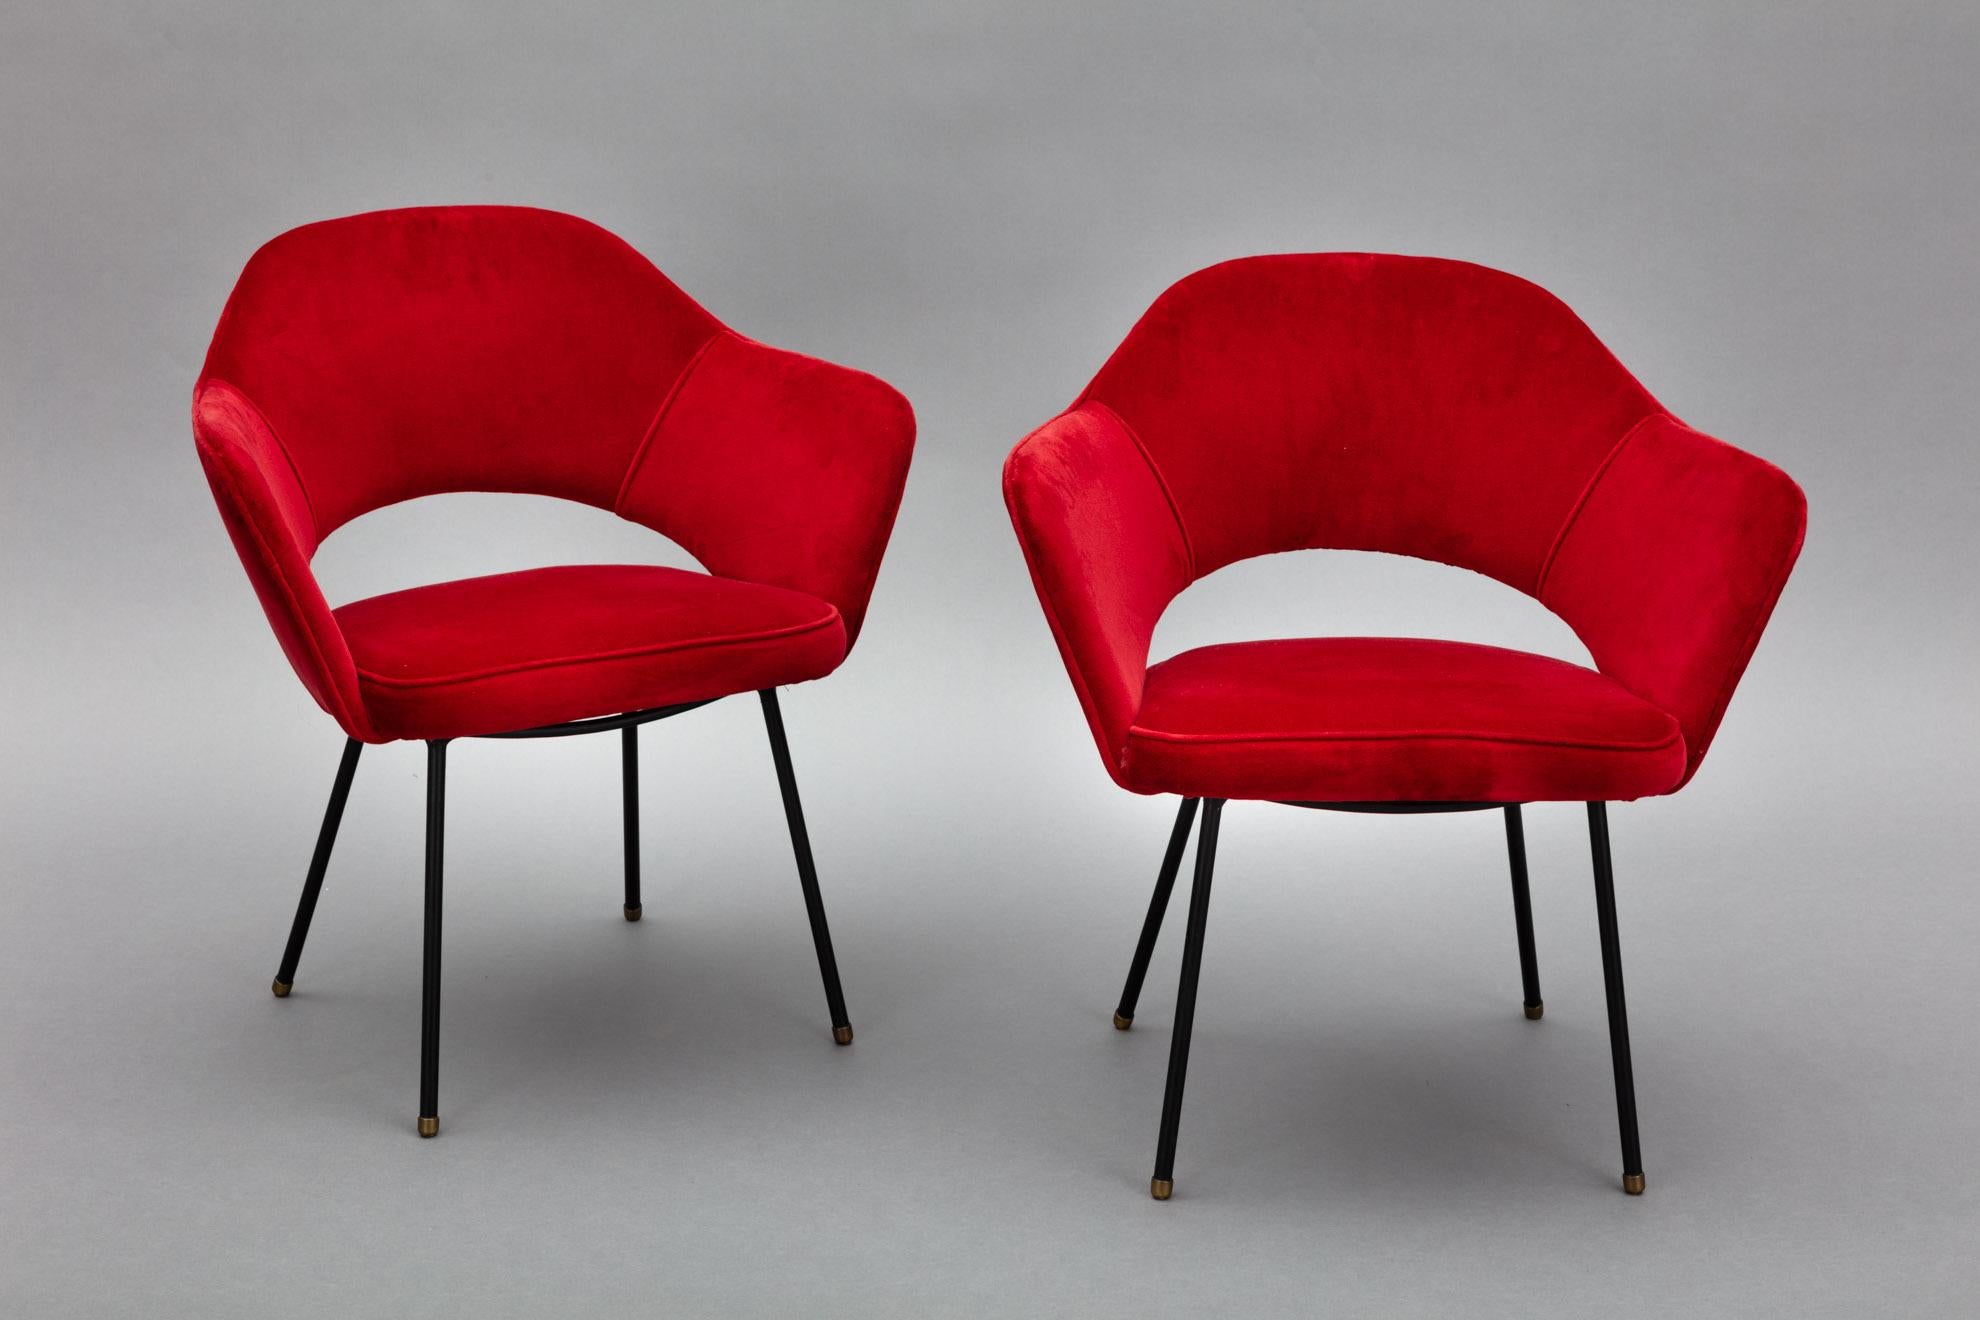 This early 1950s pair of armchairs by Hauner for Móveis Artesanal is amazing and super rare set of chair. The design for these armchairs resembles the Executive Armchair by Saarinen, but with the unique Hauner / Brazil twist. 

Born in Brescia,